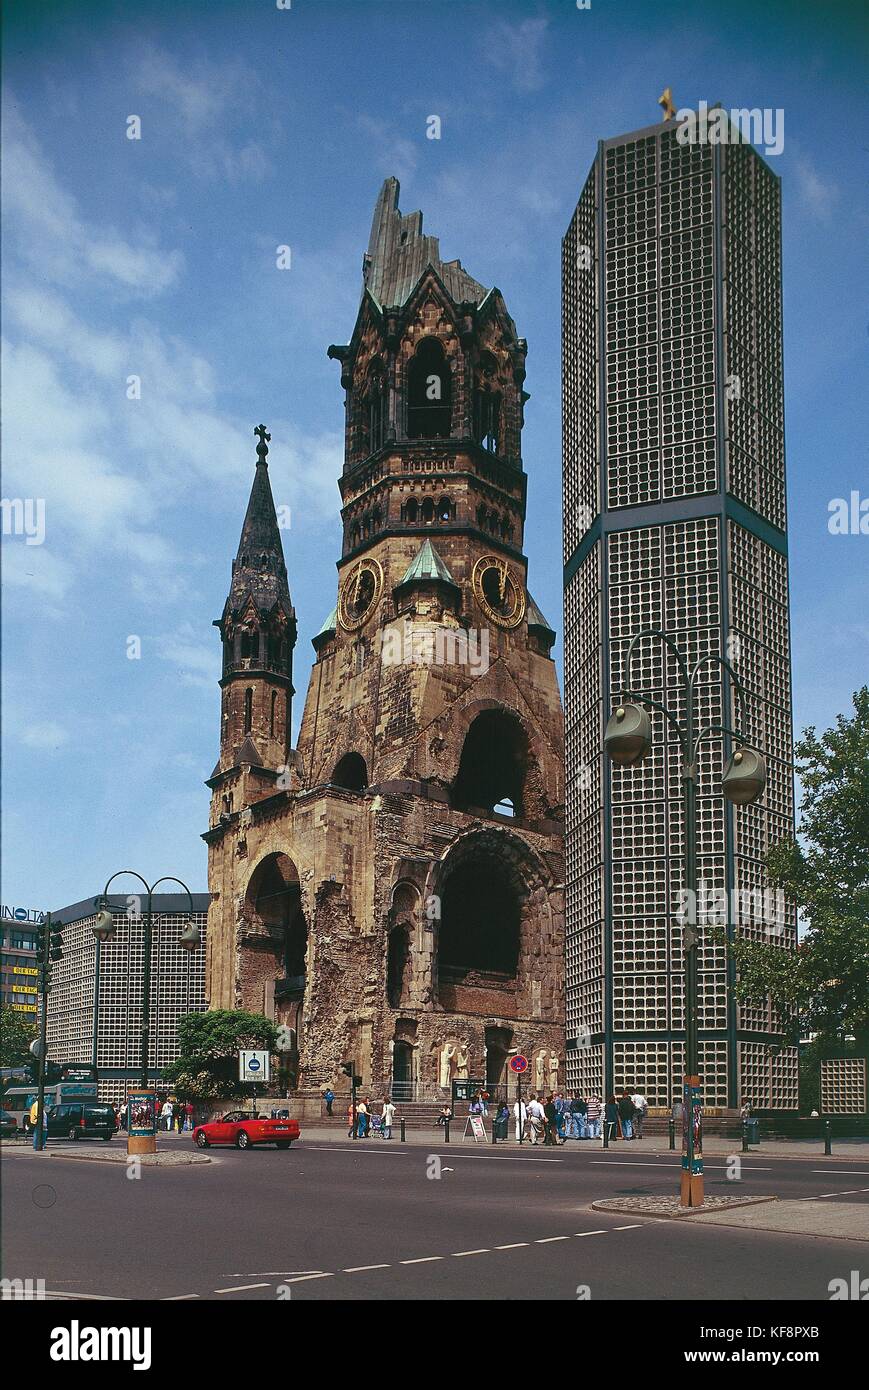 Germany, Berlin. The Kaiser Wilhelm Gedaechtnis Kirche (Kaiser Wilhelm Memorial Church), consisting of the ruins of the original church (1891-1895) and the new building designed by Egon Eiermann (1959-1961). Stock Photo